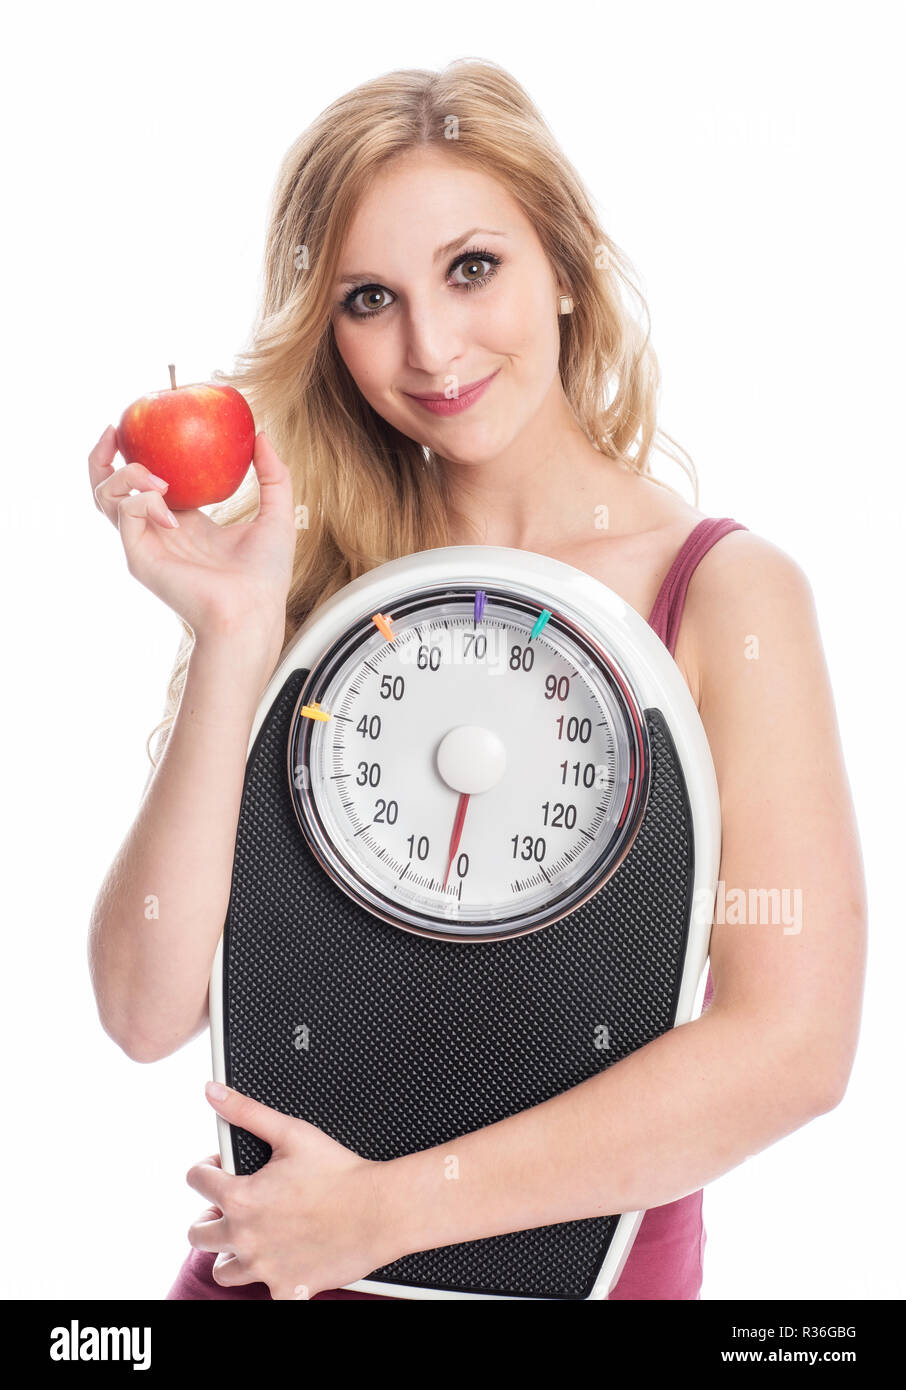 woman with scales and apple Stock Photo